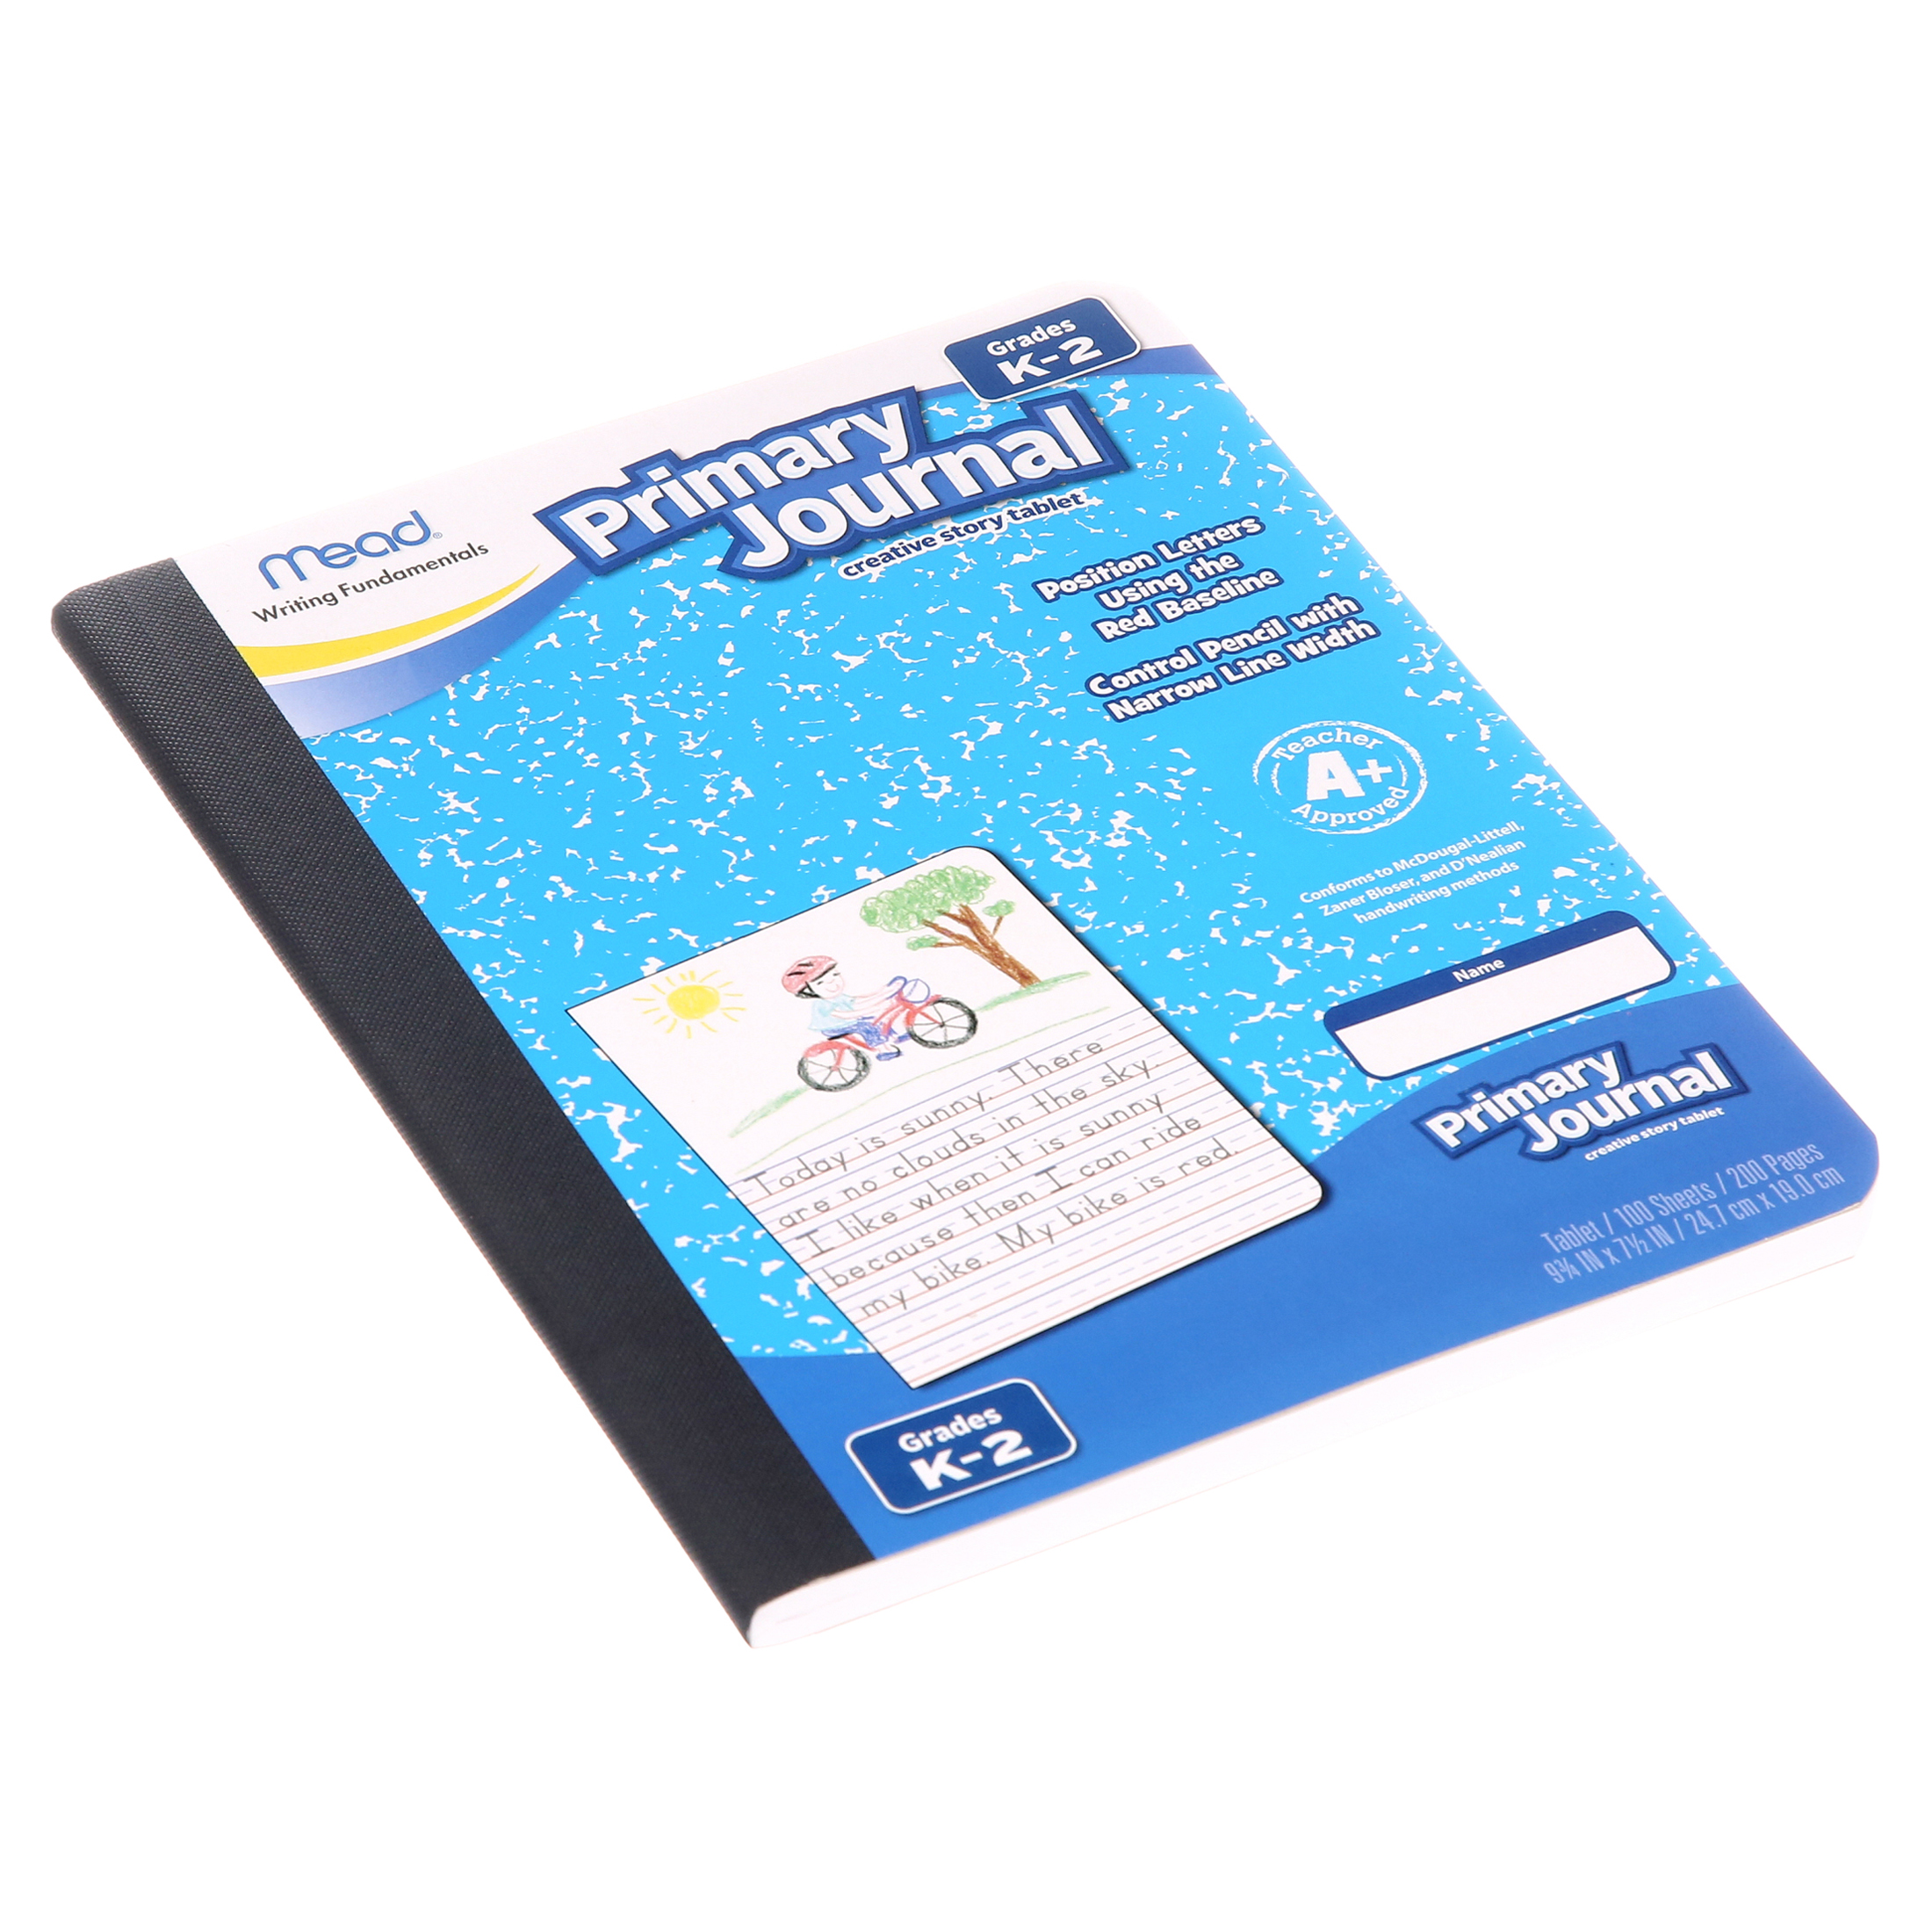 Page　Ruled,　K-2,　Mead　100　Half　(09535)　Primary　Sheets　Journal,　Grades